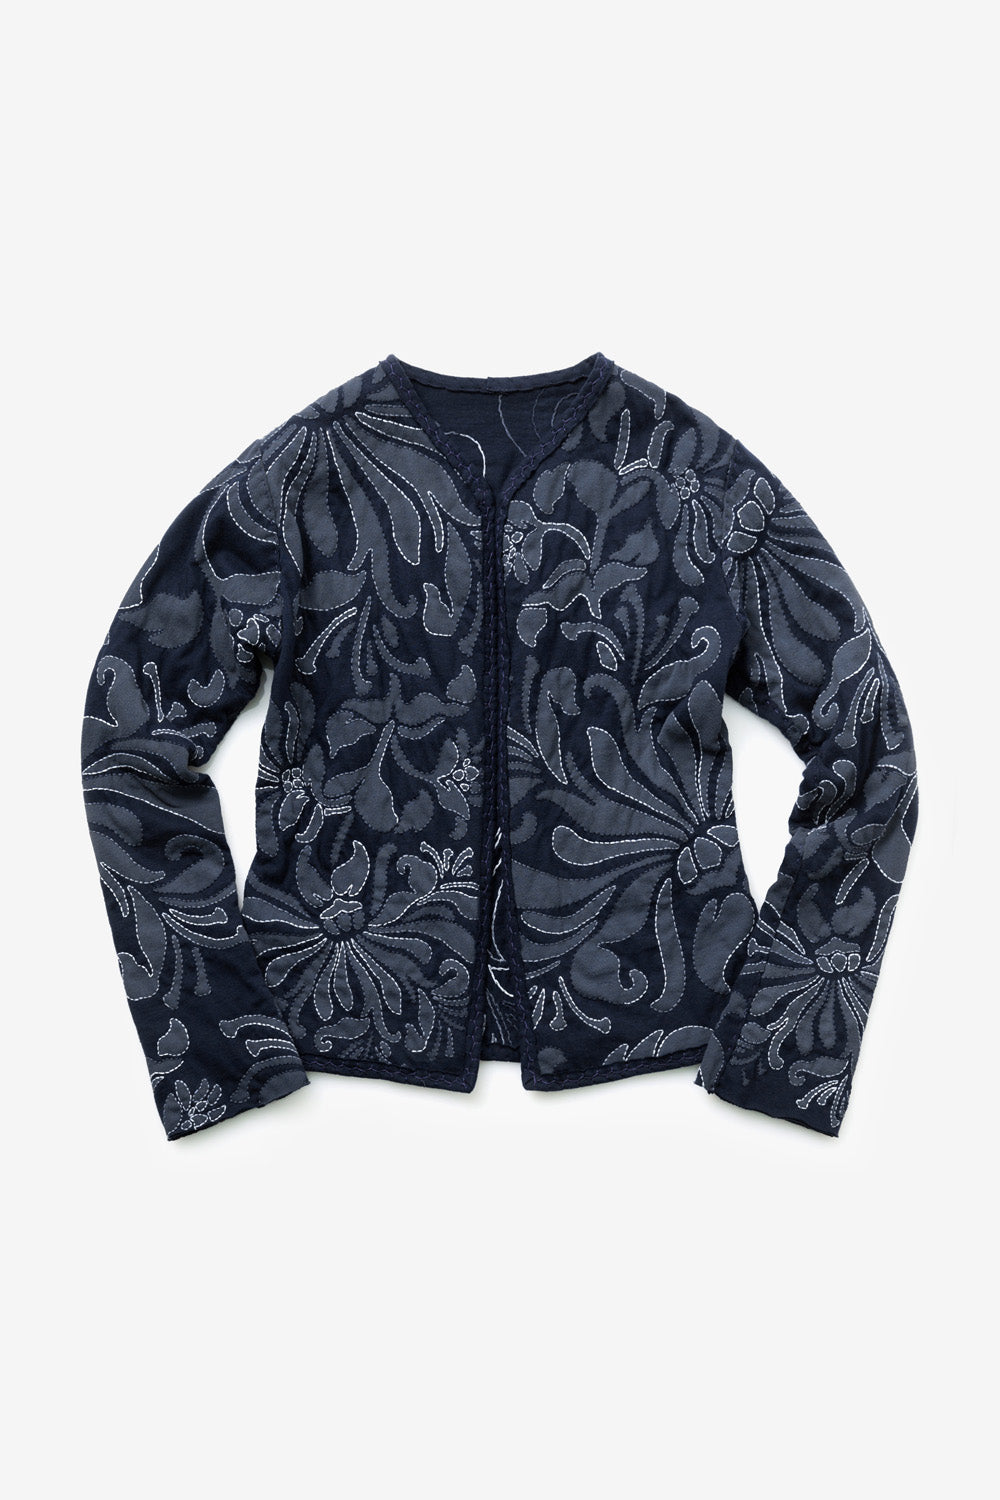 The School of Making Classic Jacket Kit Organic Cotton Womens Coat with Long Sleeve in Blue